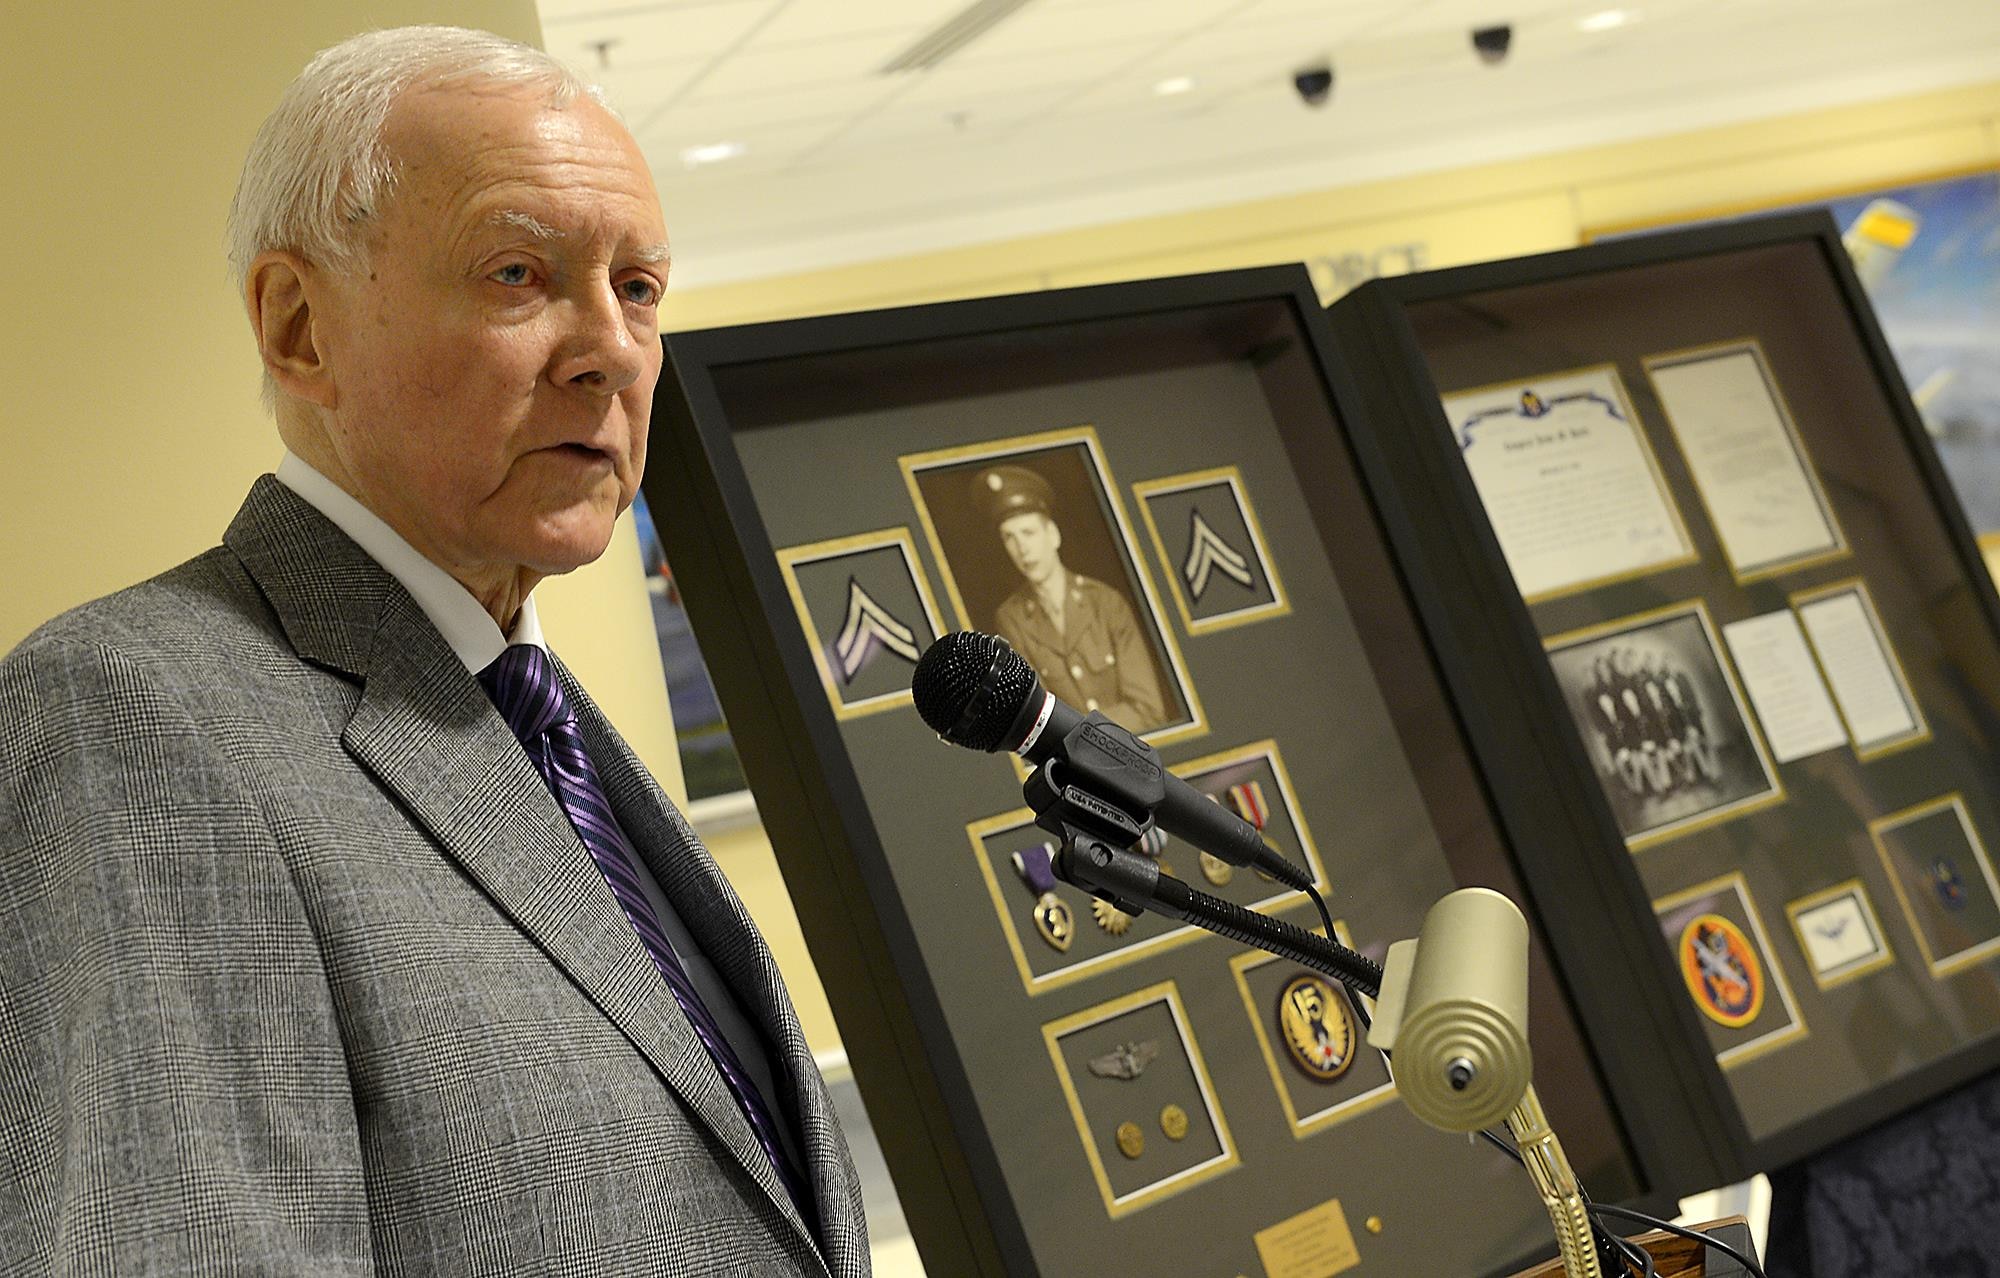 Sen. Orrin Hatch of Utah, thanks Secretary of the Air Force Deborah Lee James for presenting him with two shadow boxes March 20, 2015, at the Pentagon in Washington D.C.  The shadow boxes honored the service of his brother, Cpl. Jesse Hatch, who died with his crew during a mission in World War II. Cpl. Hatch was a nose turret gunner with the 451st Bombardment Group, 725th Bomb Squadron. (U.S. Air Force photo/Scott M. Ash)